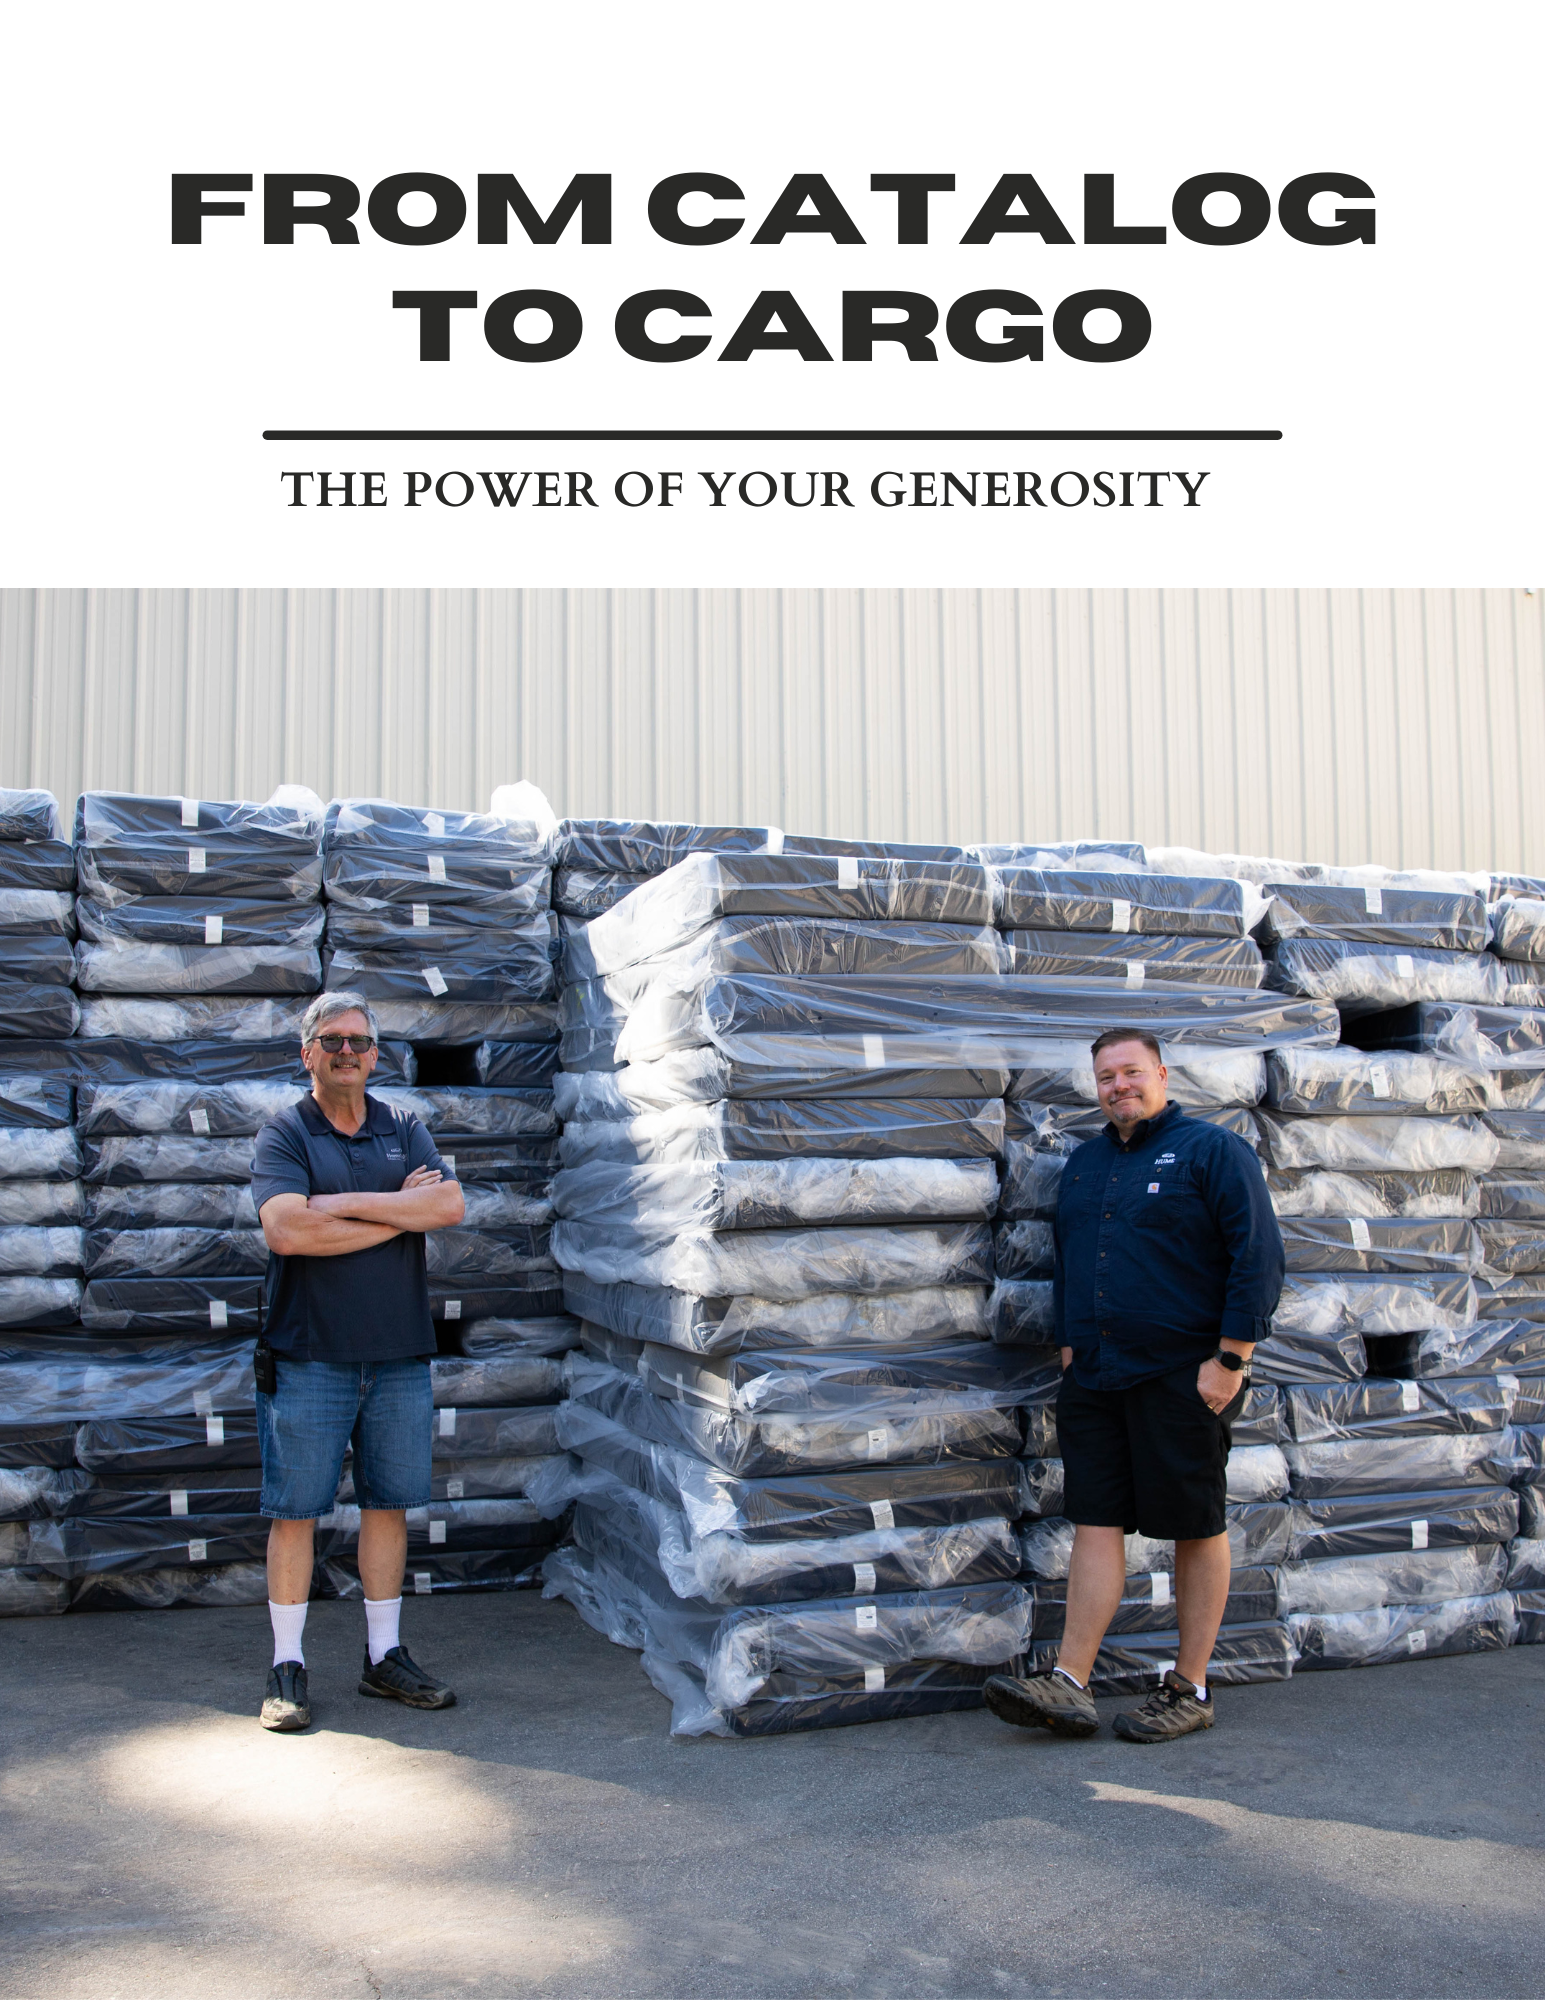 From Catalog to Cargo: The Power of Your Generosity